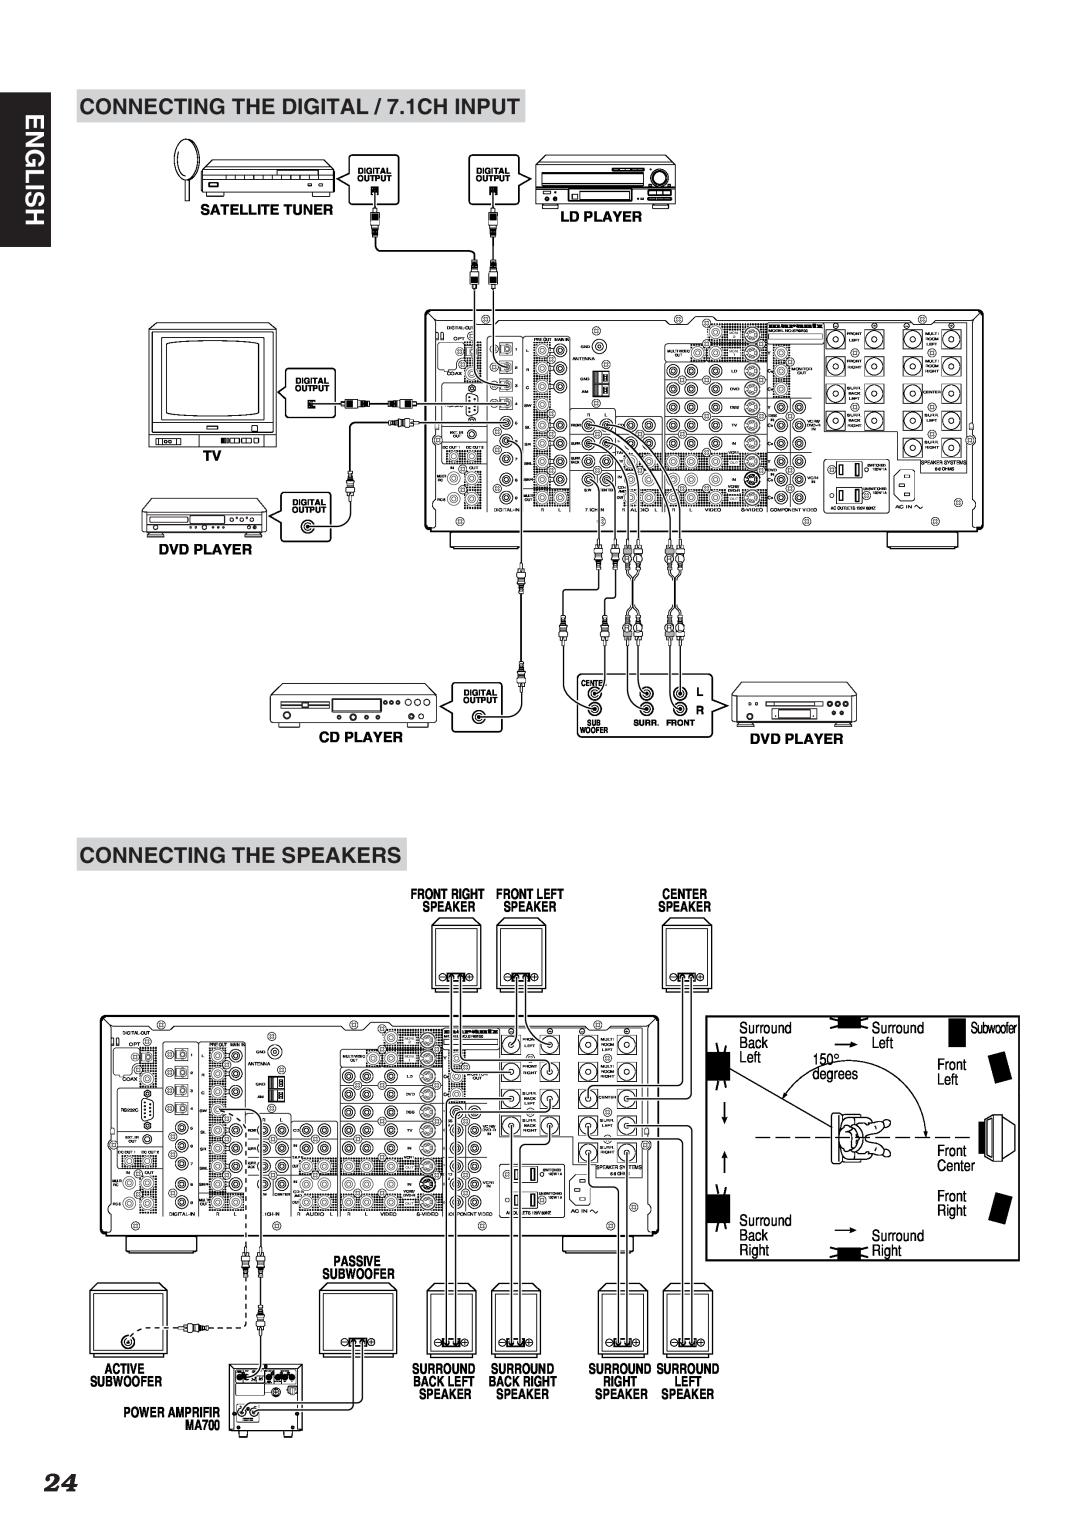 Marantz SR9200 manual English, CONNECTING THE DIGITAL / 7.1CH INPUT, Connecting The Speakers, Satellite Tuner, Ld Player 